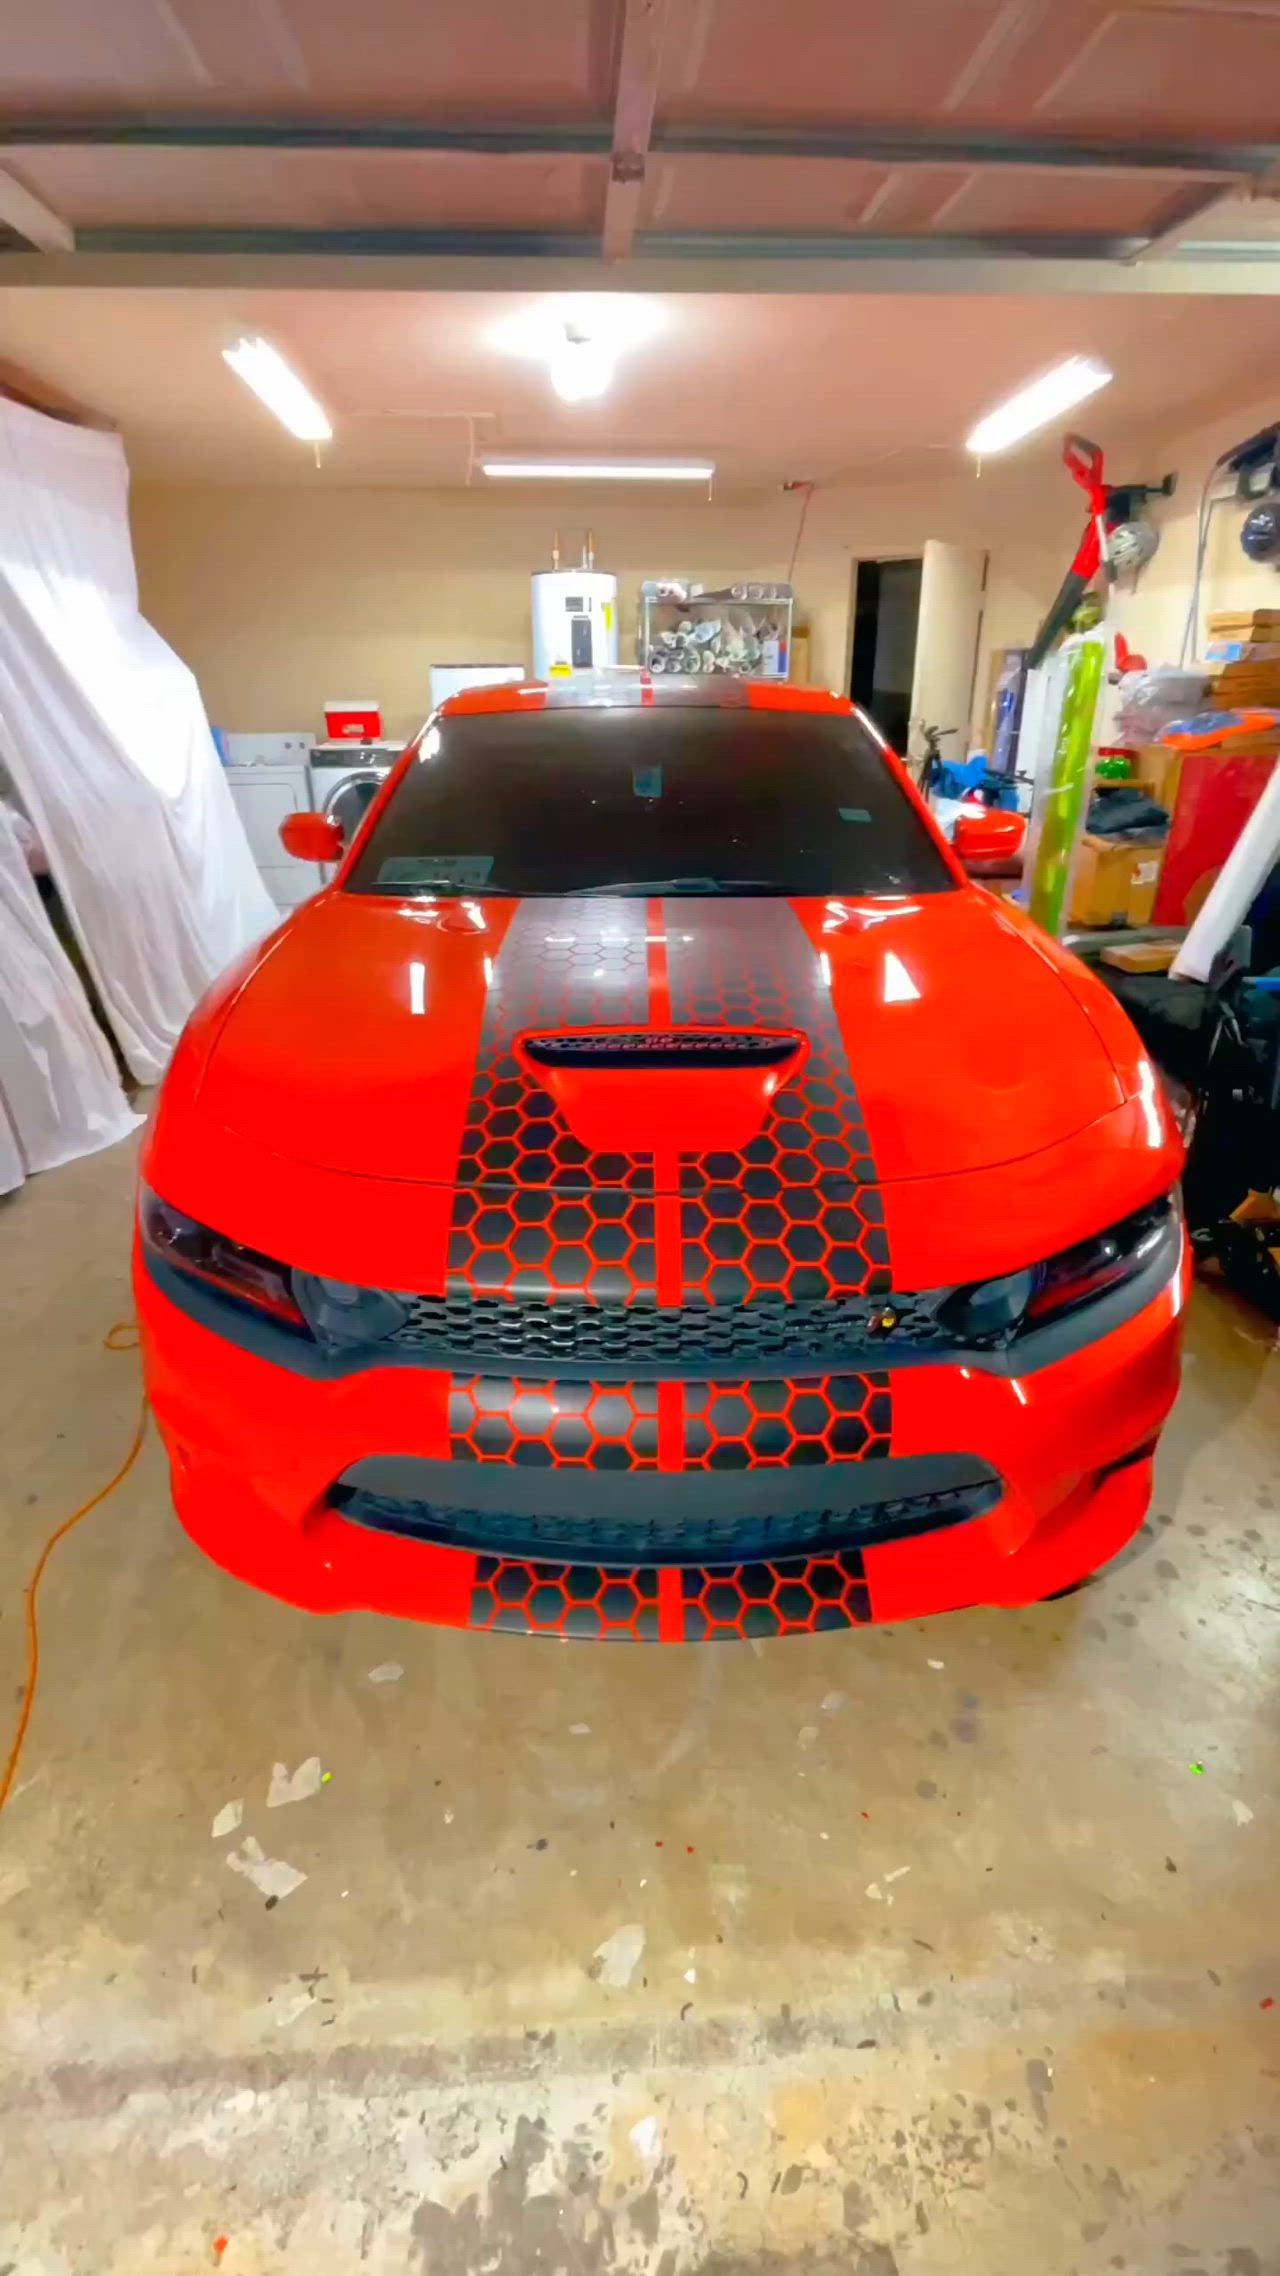 This may contain: an orange sports car parked in a garage